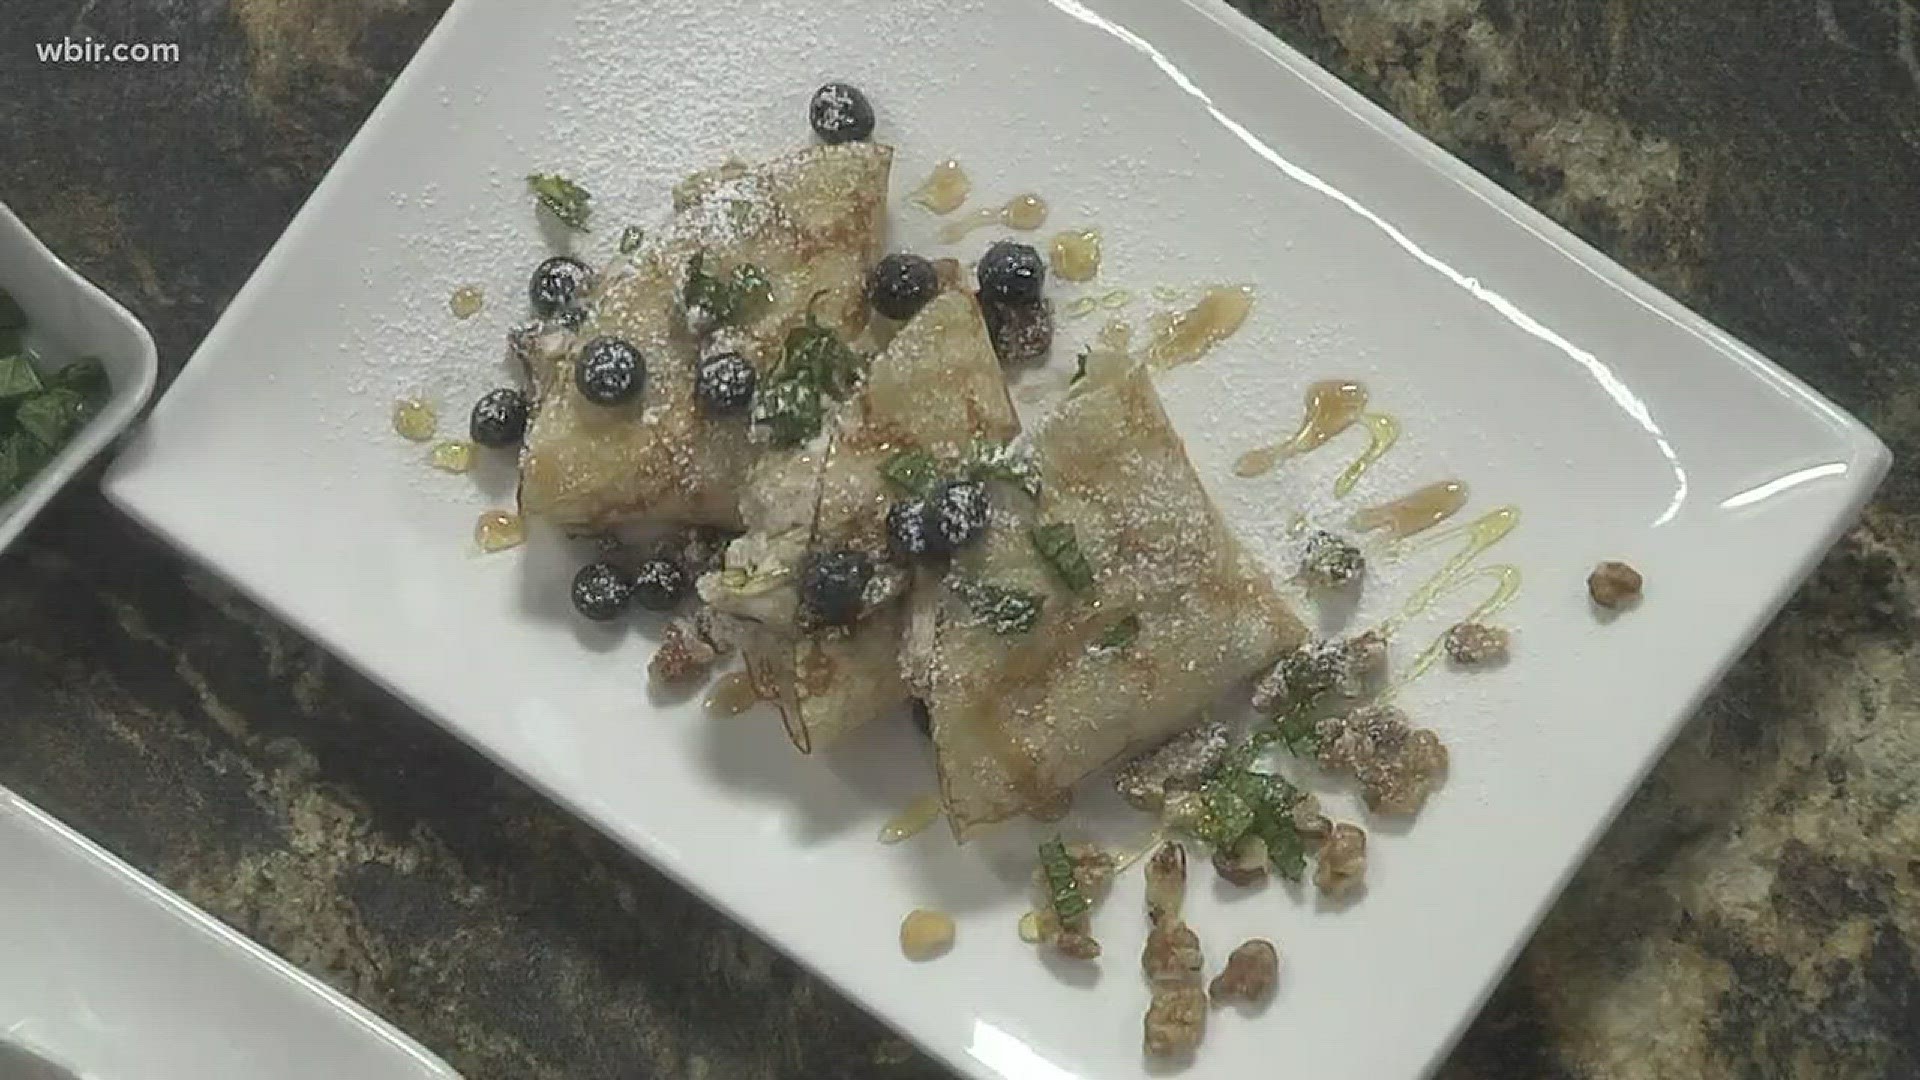 Gary Nicely from Naples Italian Restaurant shows us how to make delicious ricotta cheese crepes!